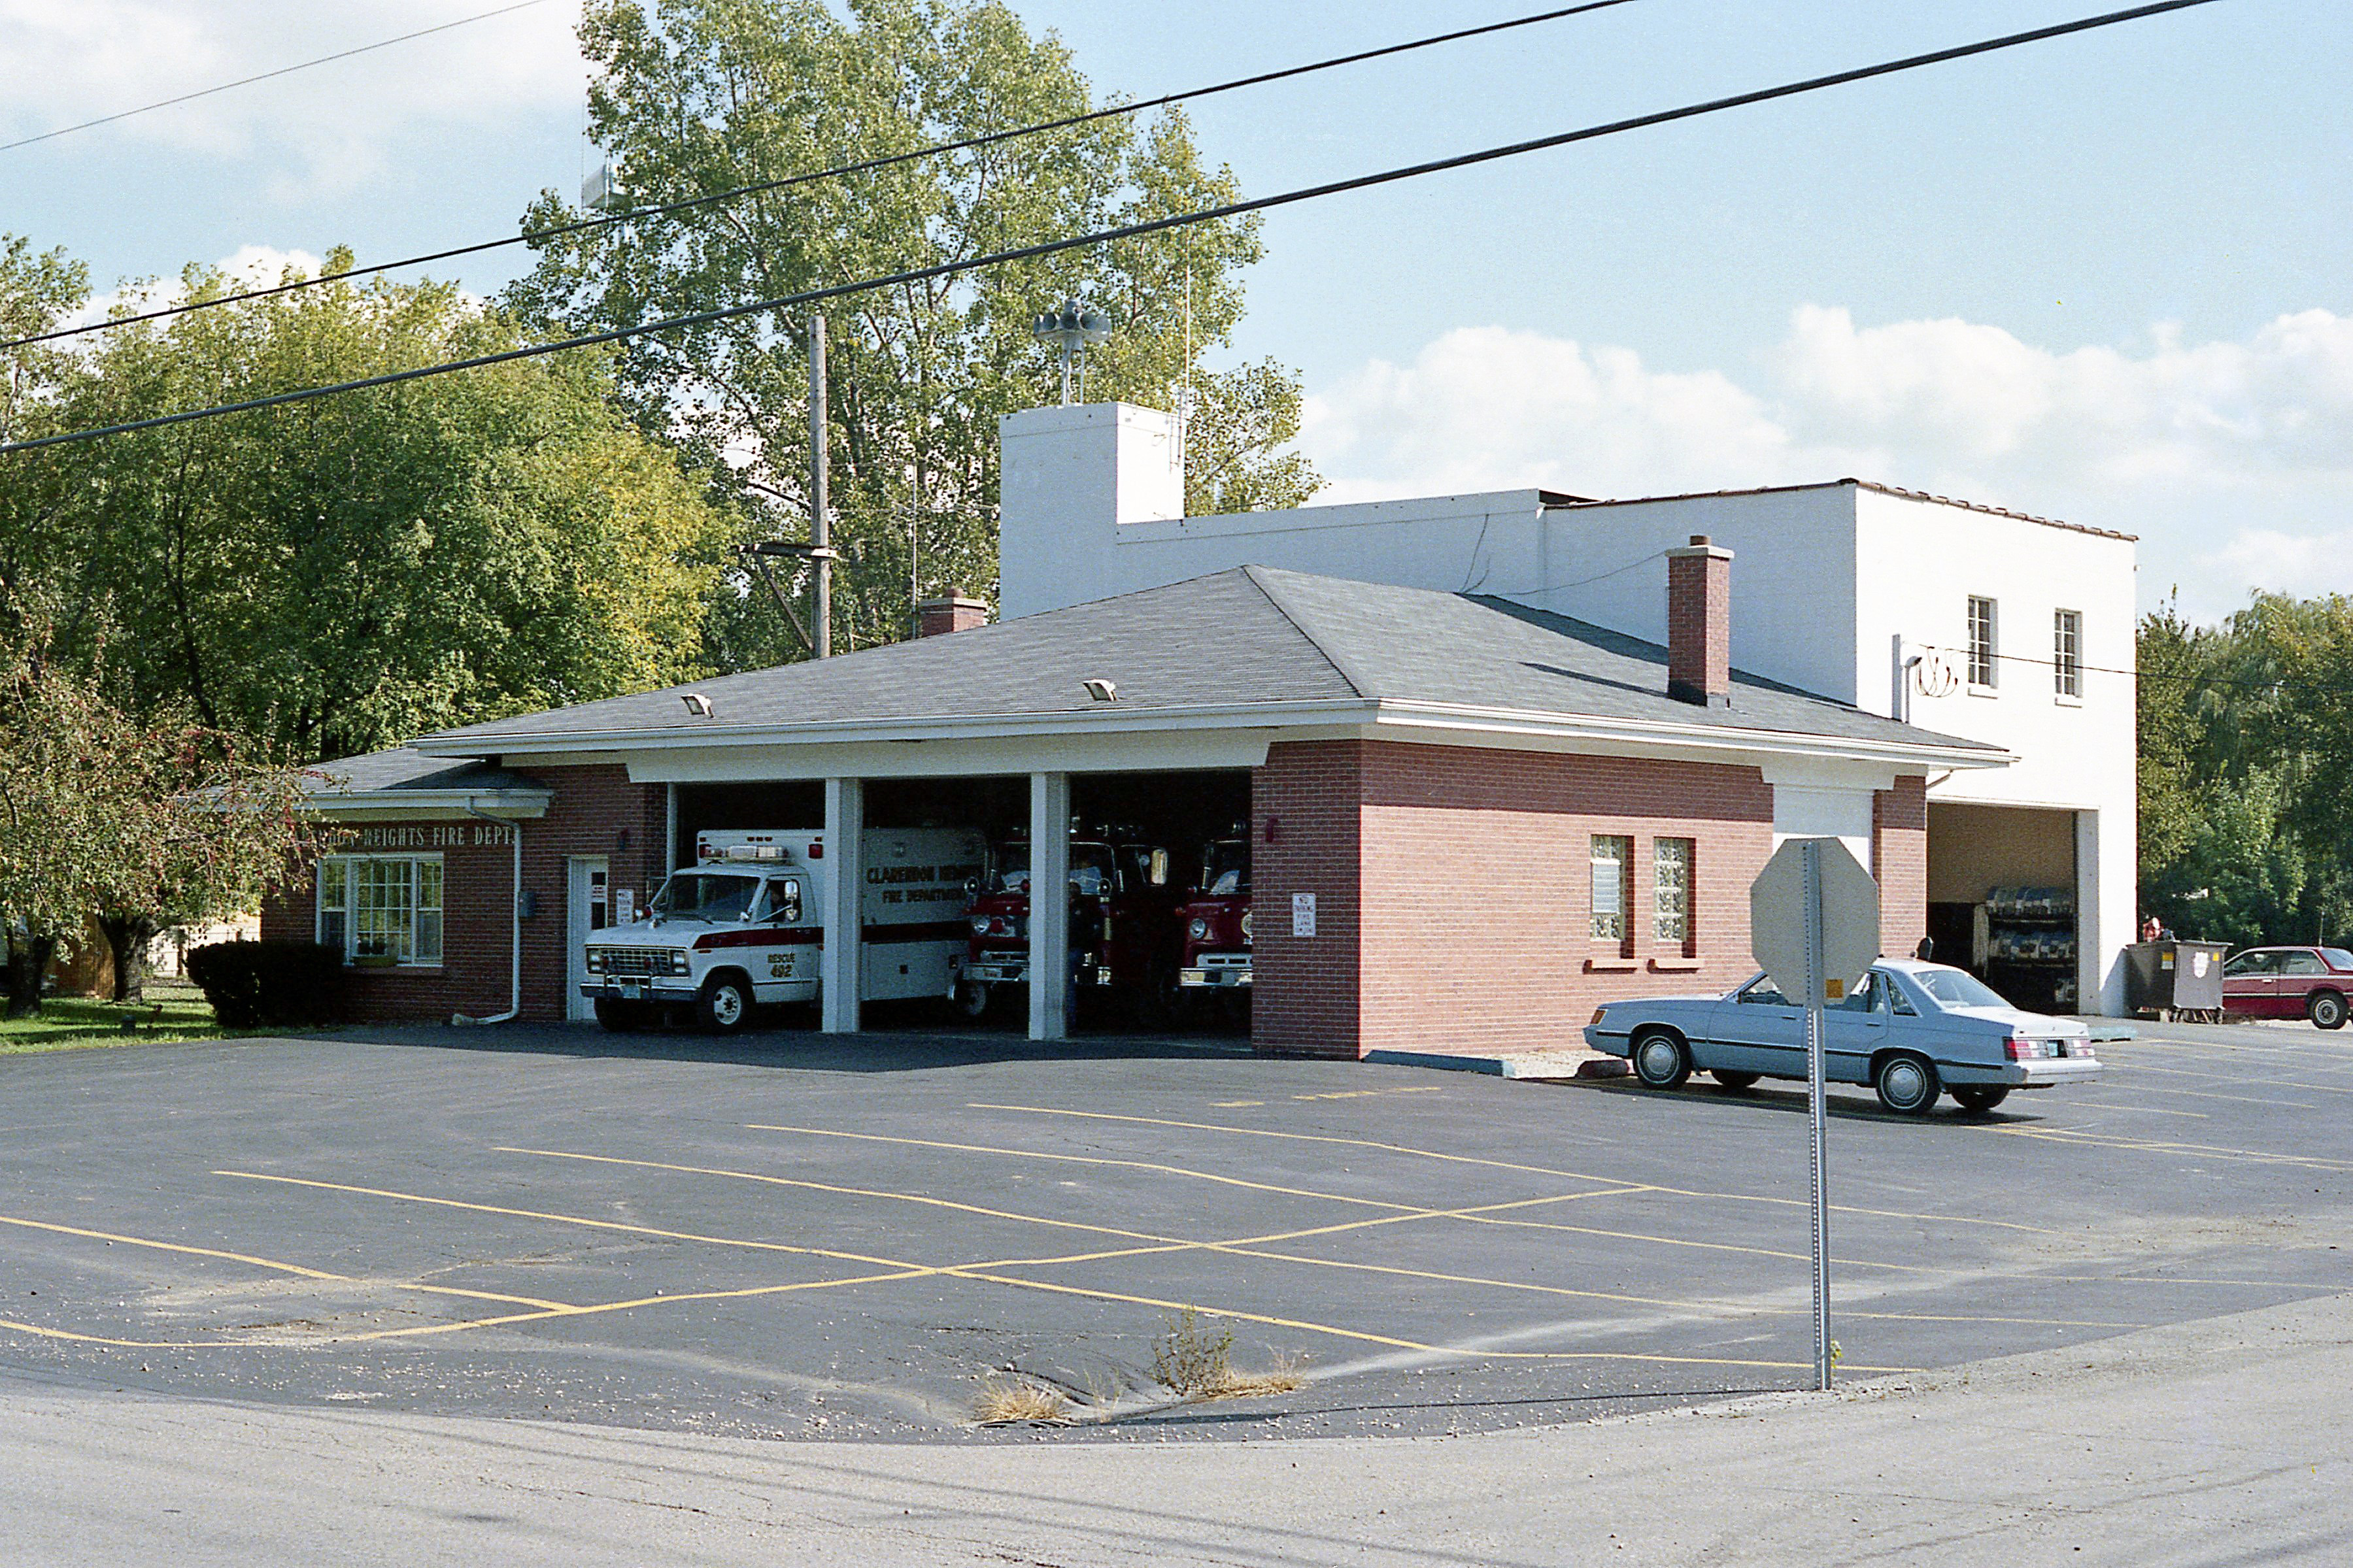 CLARENDON HEIGHTS FPD STATION